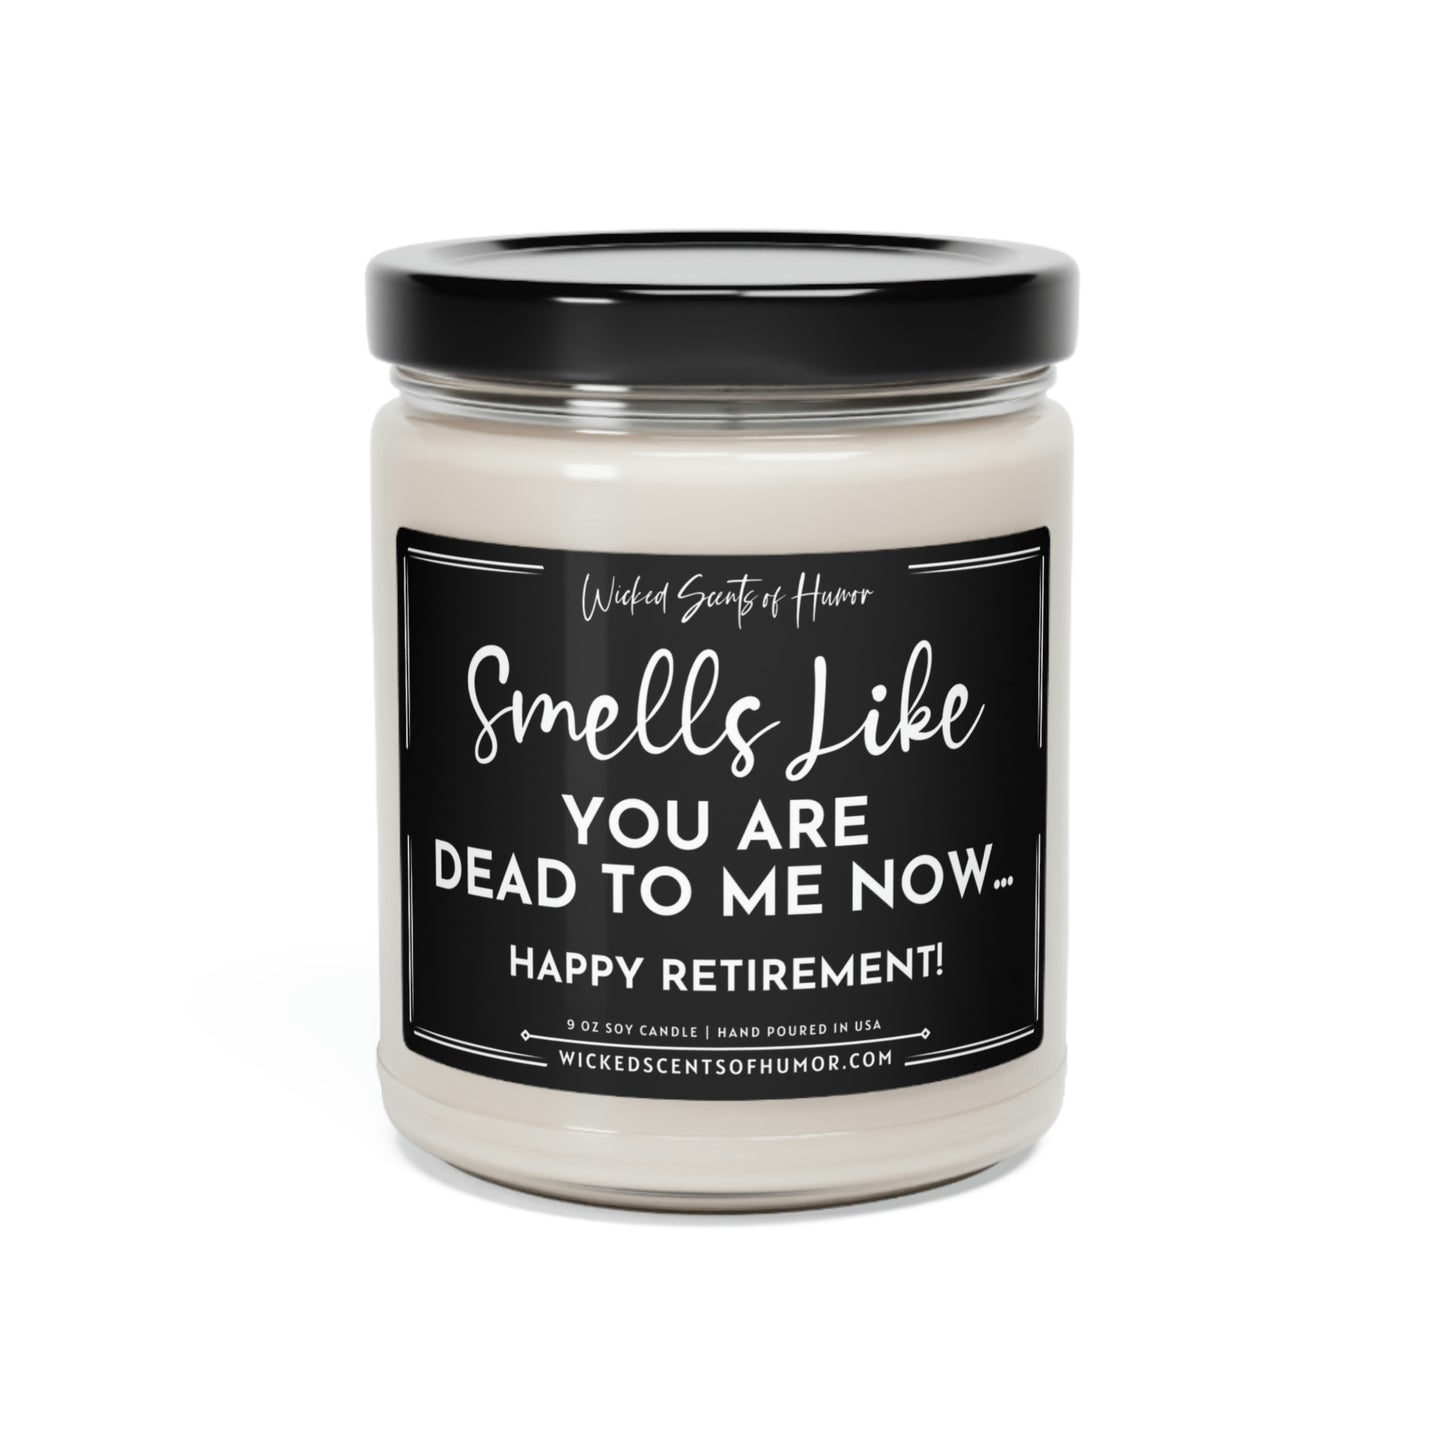 Happy Retirement Gift, Smells Like You Are Dead To Me Now, Funny Candle Gift, Eco-Friendly All Natural Soy Candle,